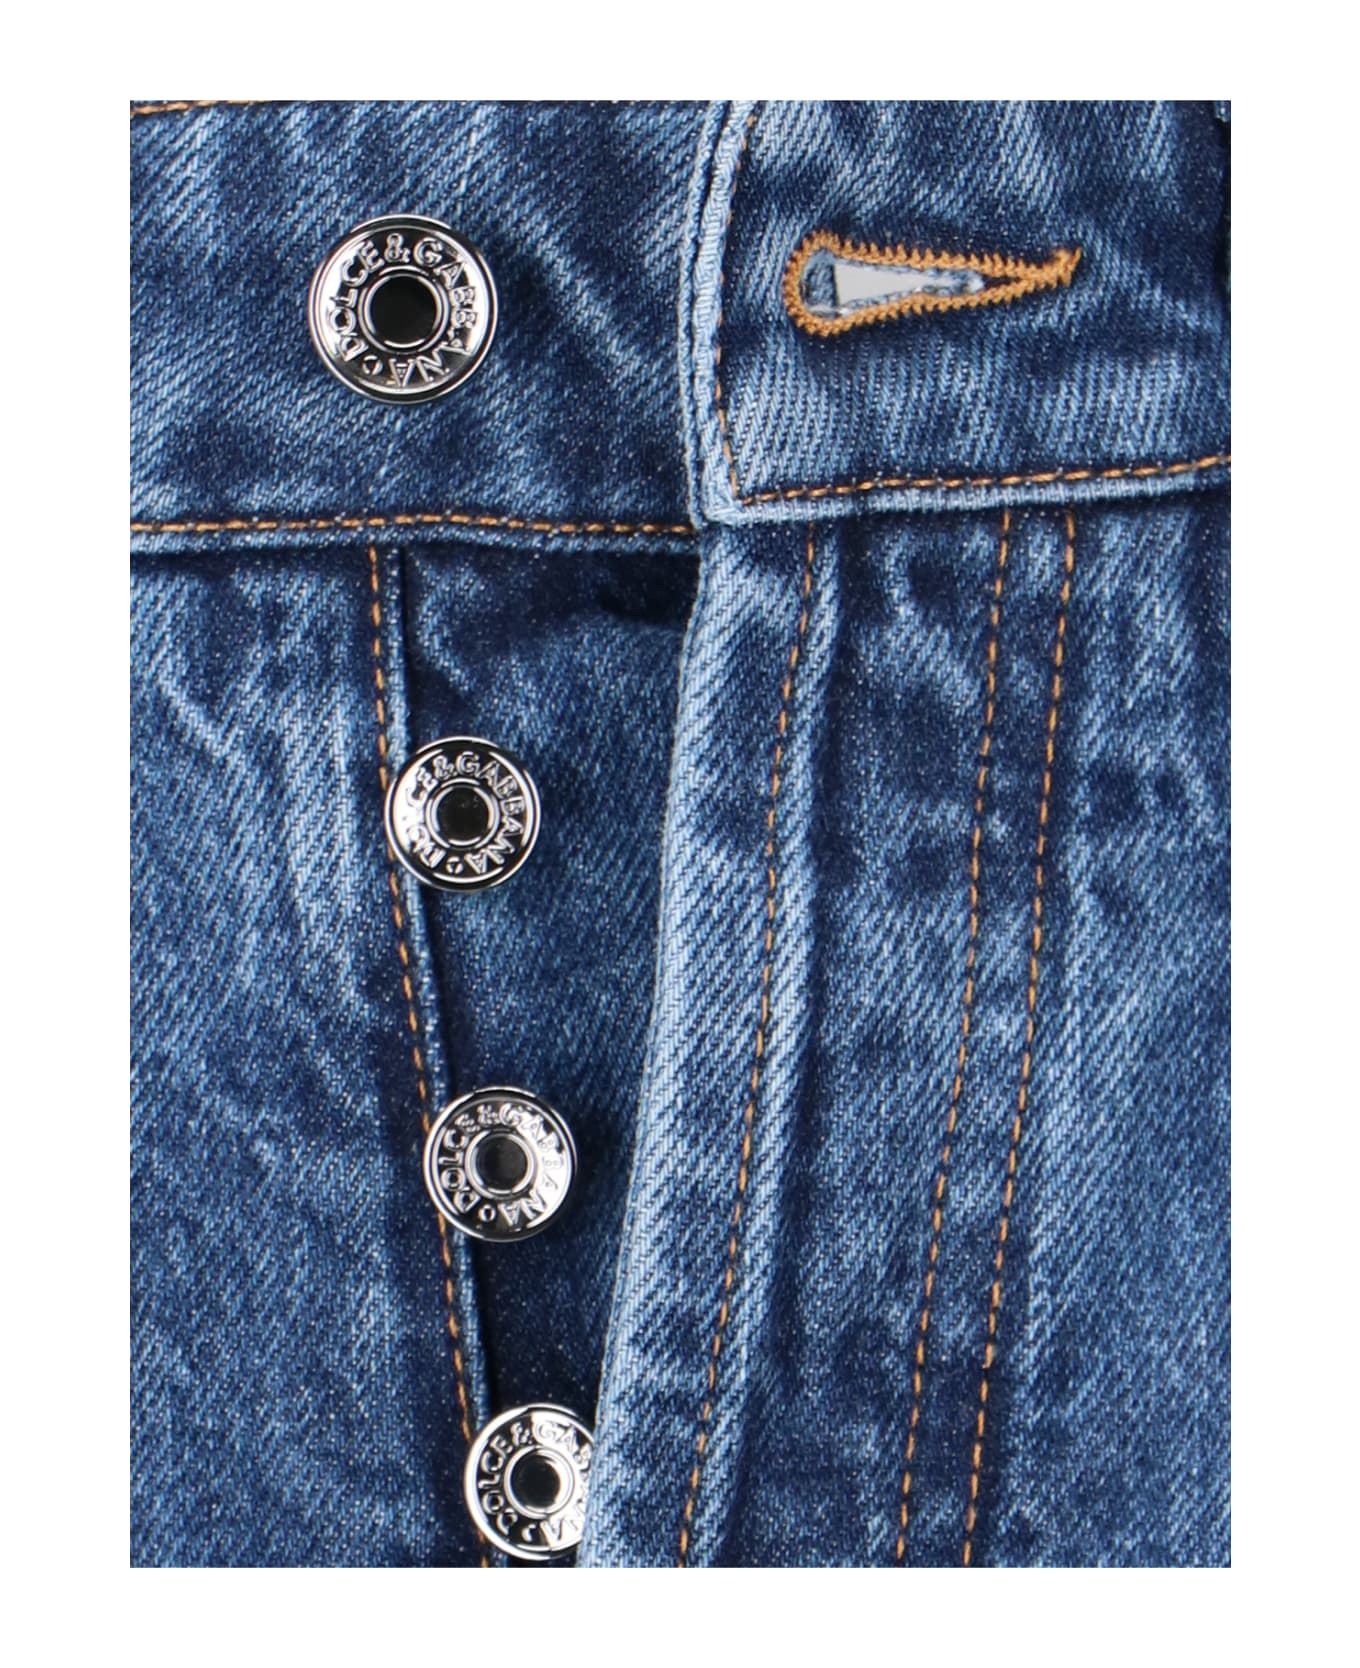 Dolce & Gabbana Ripped Jeans - Blue デニム